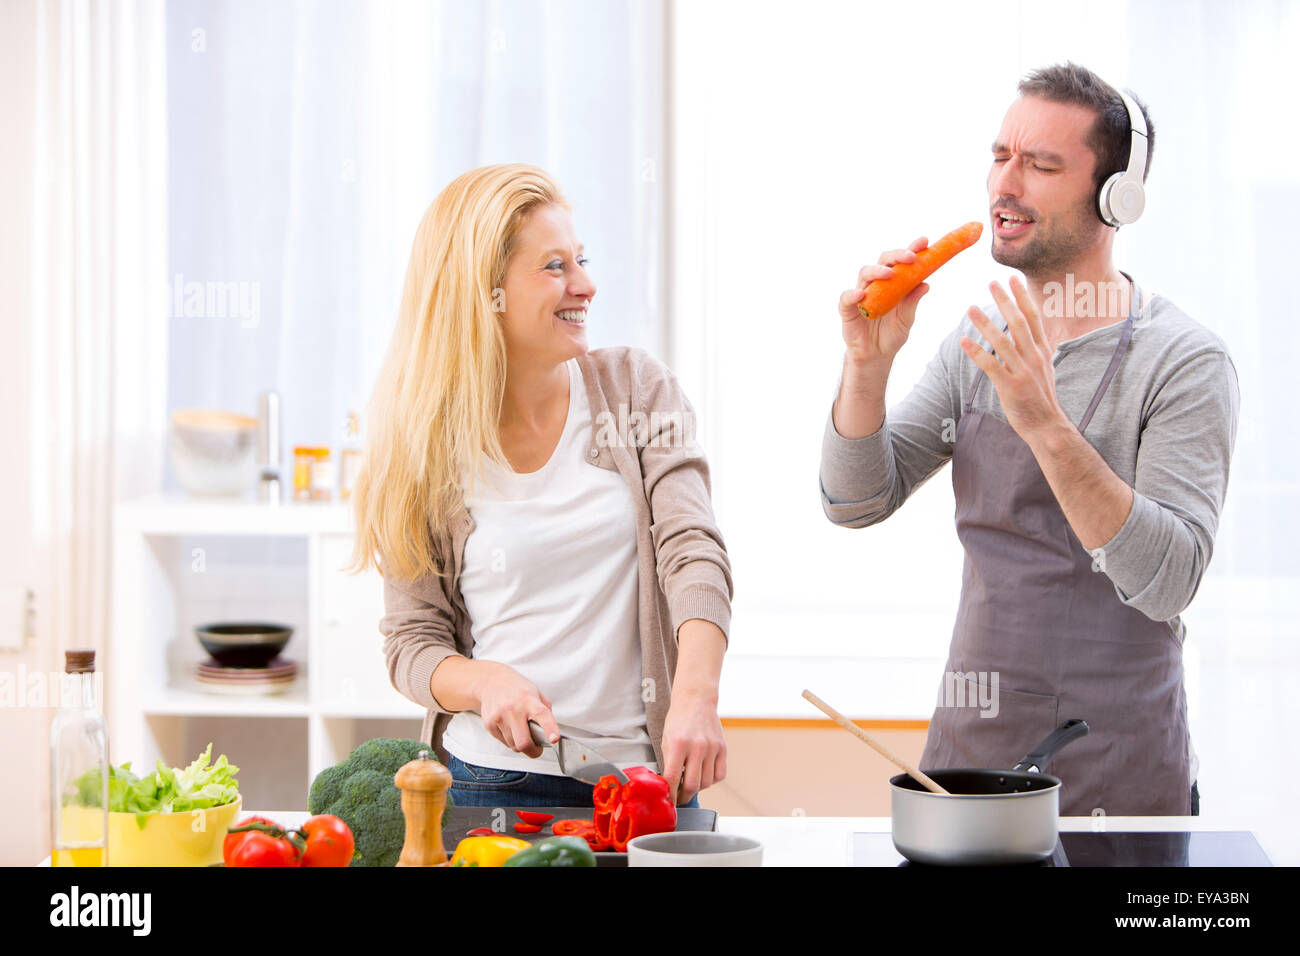 View of a Young attractive couple having fun in the kitchen Stock Photo